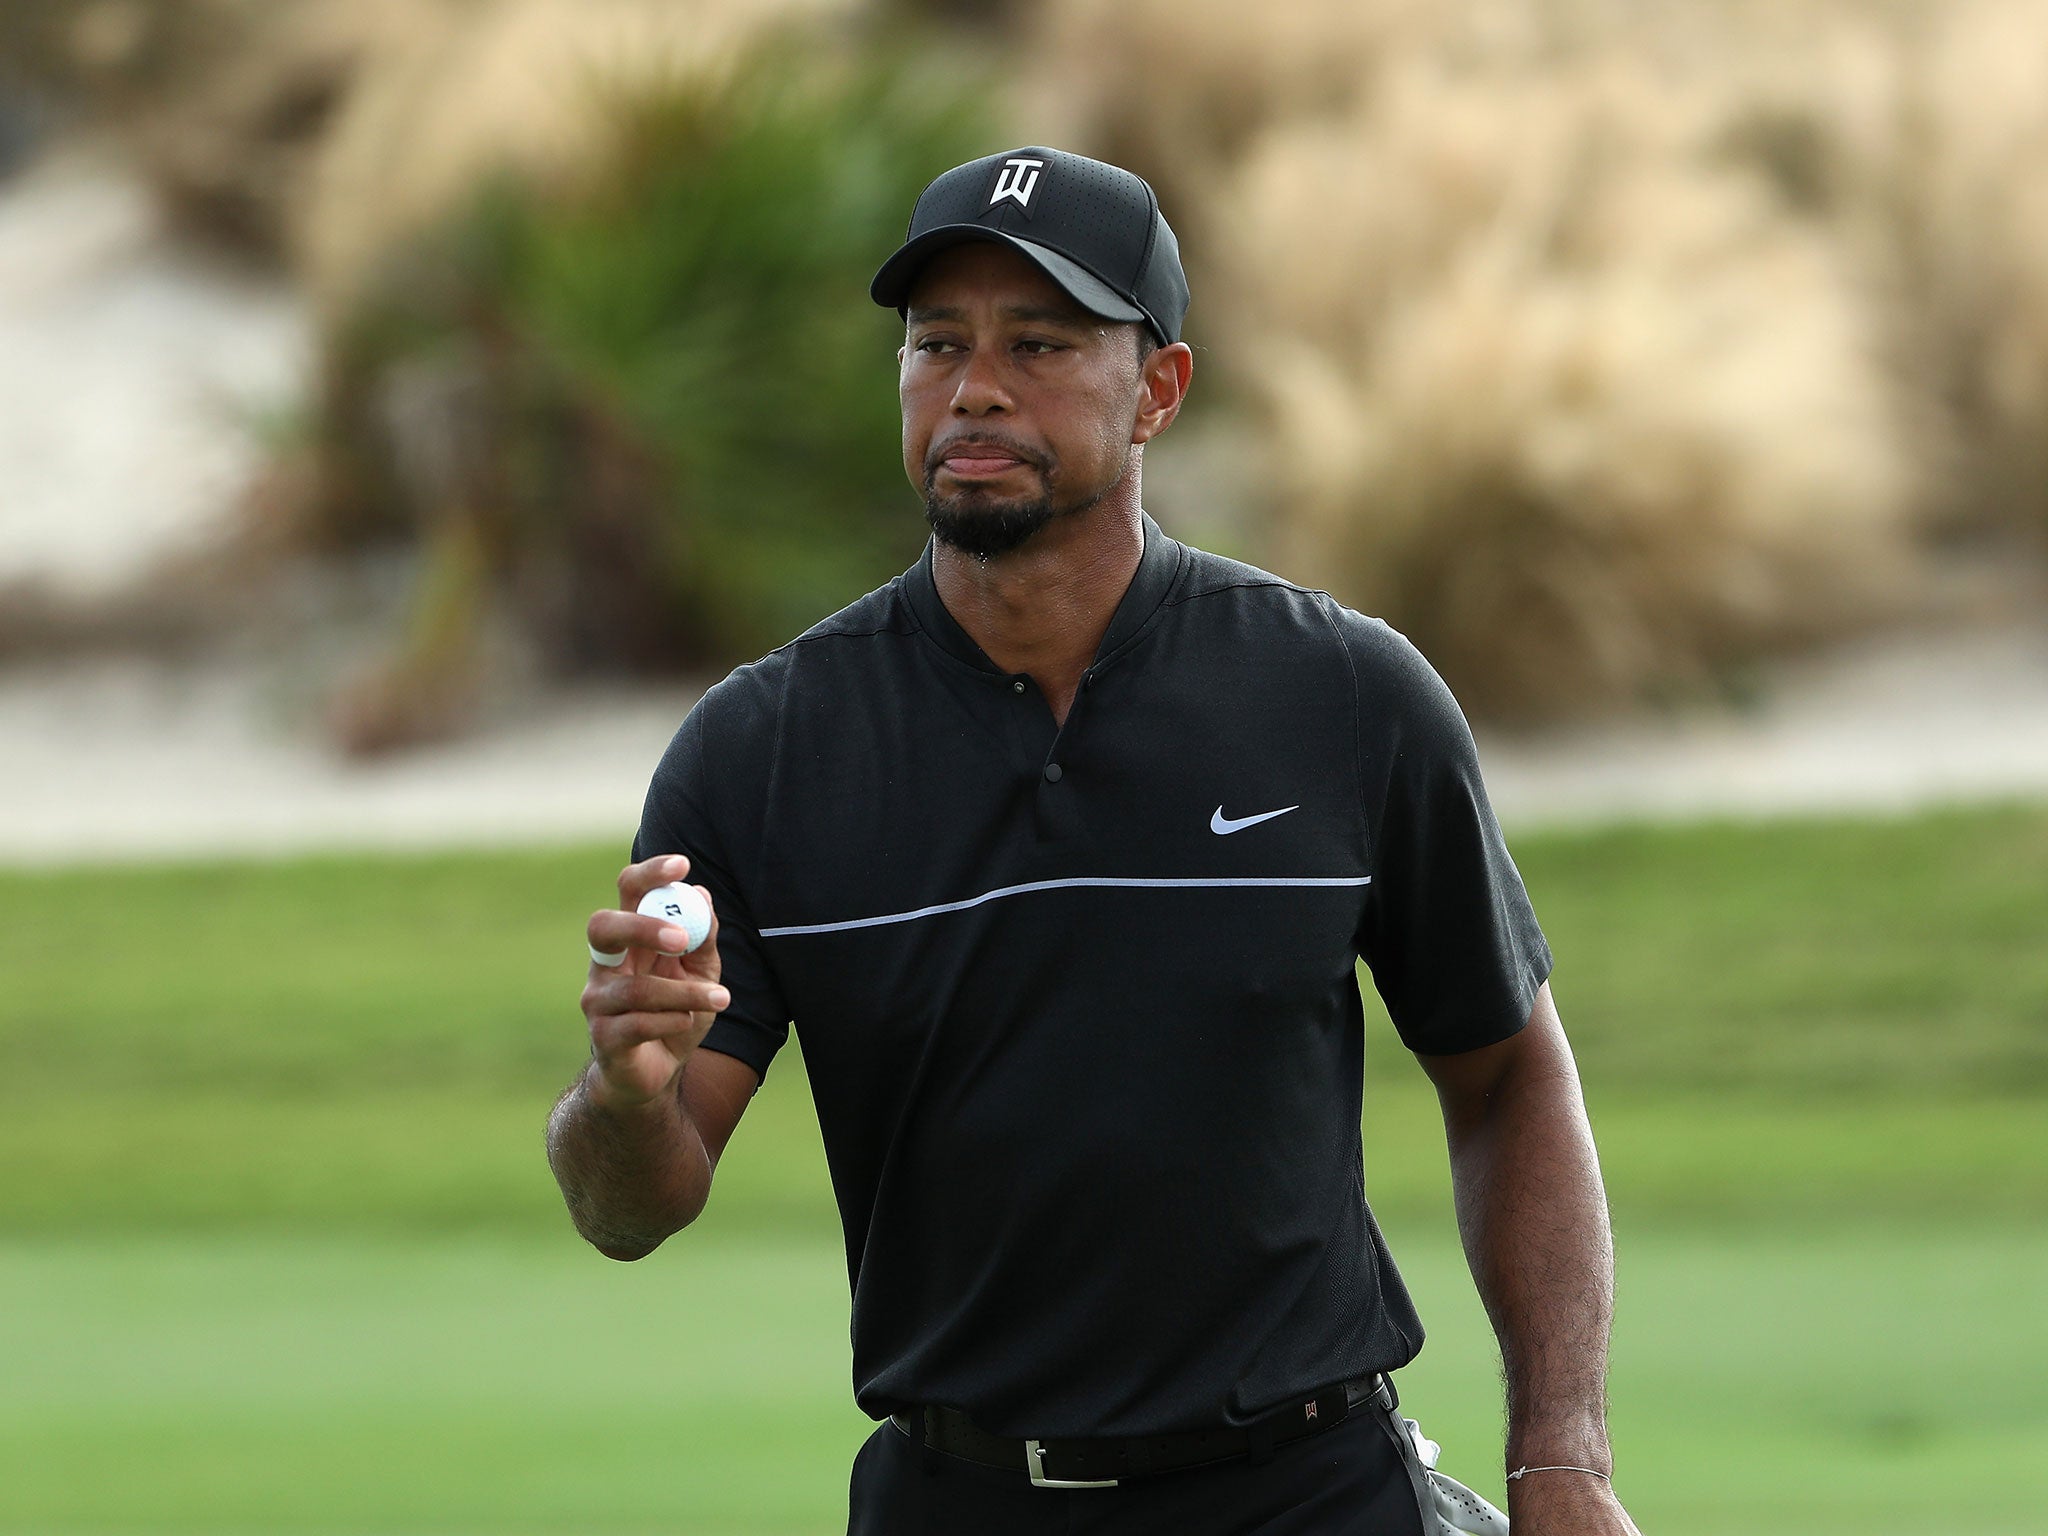 Tiger Woods made his return to competitive golf on Thursday after 16 months out with a back injury